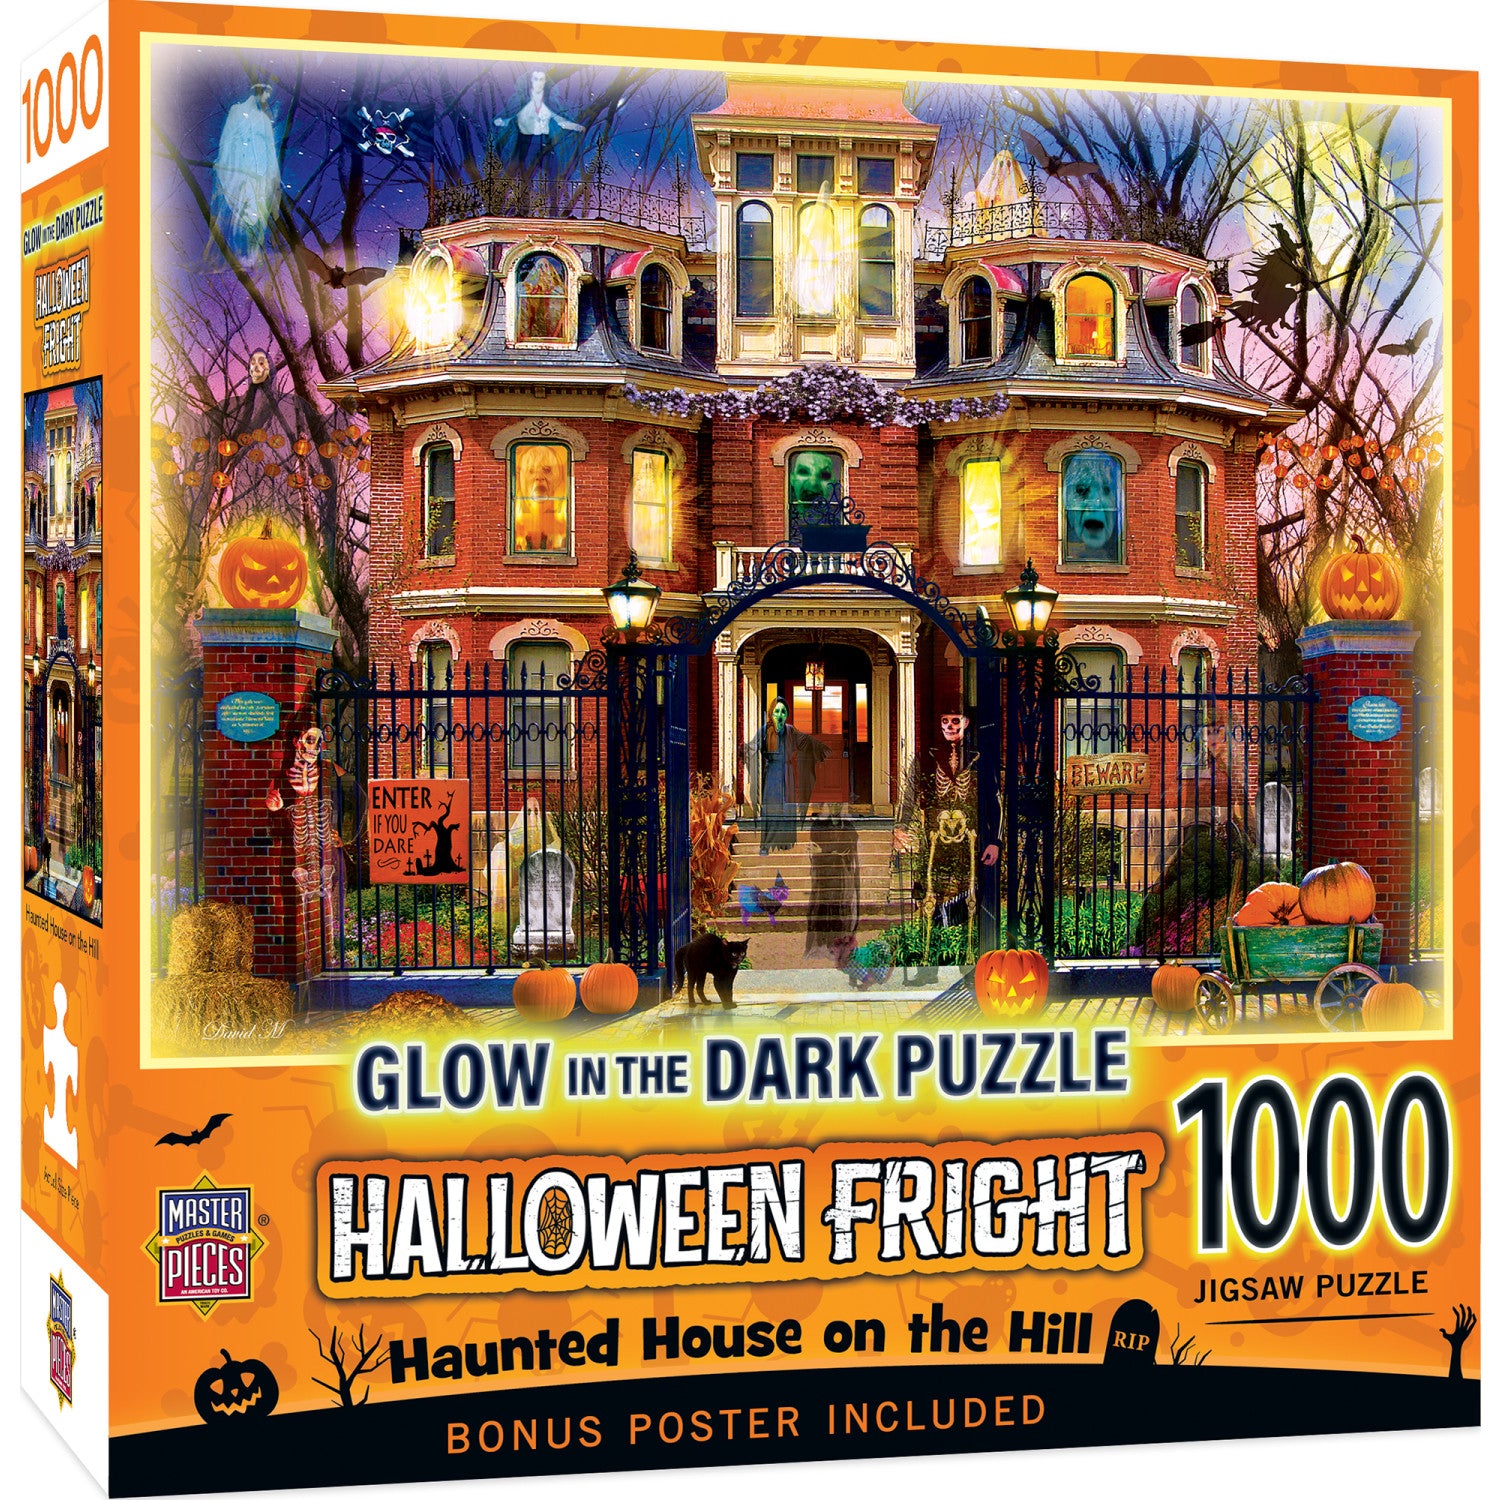 Glow in the Dark - Haunted House on the Hill 1000 Piece Jigsaw Puzzle